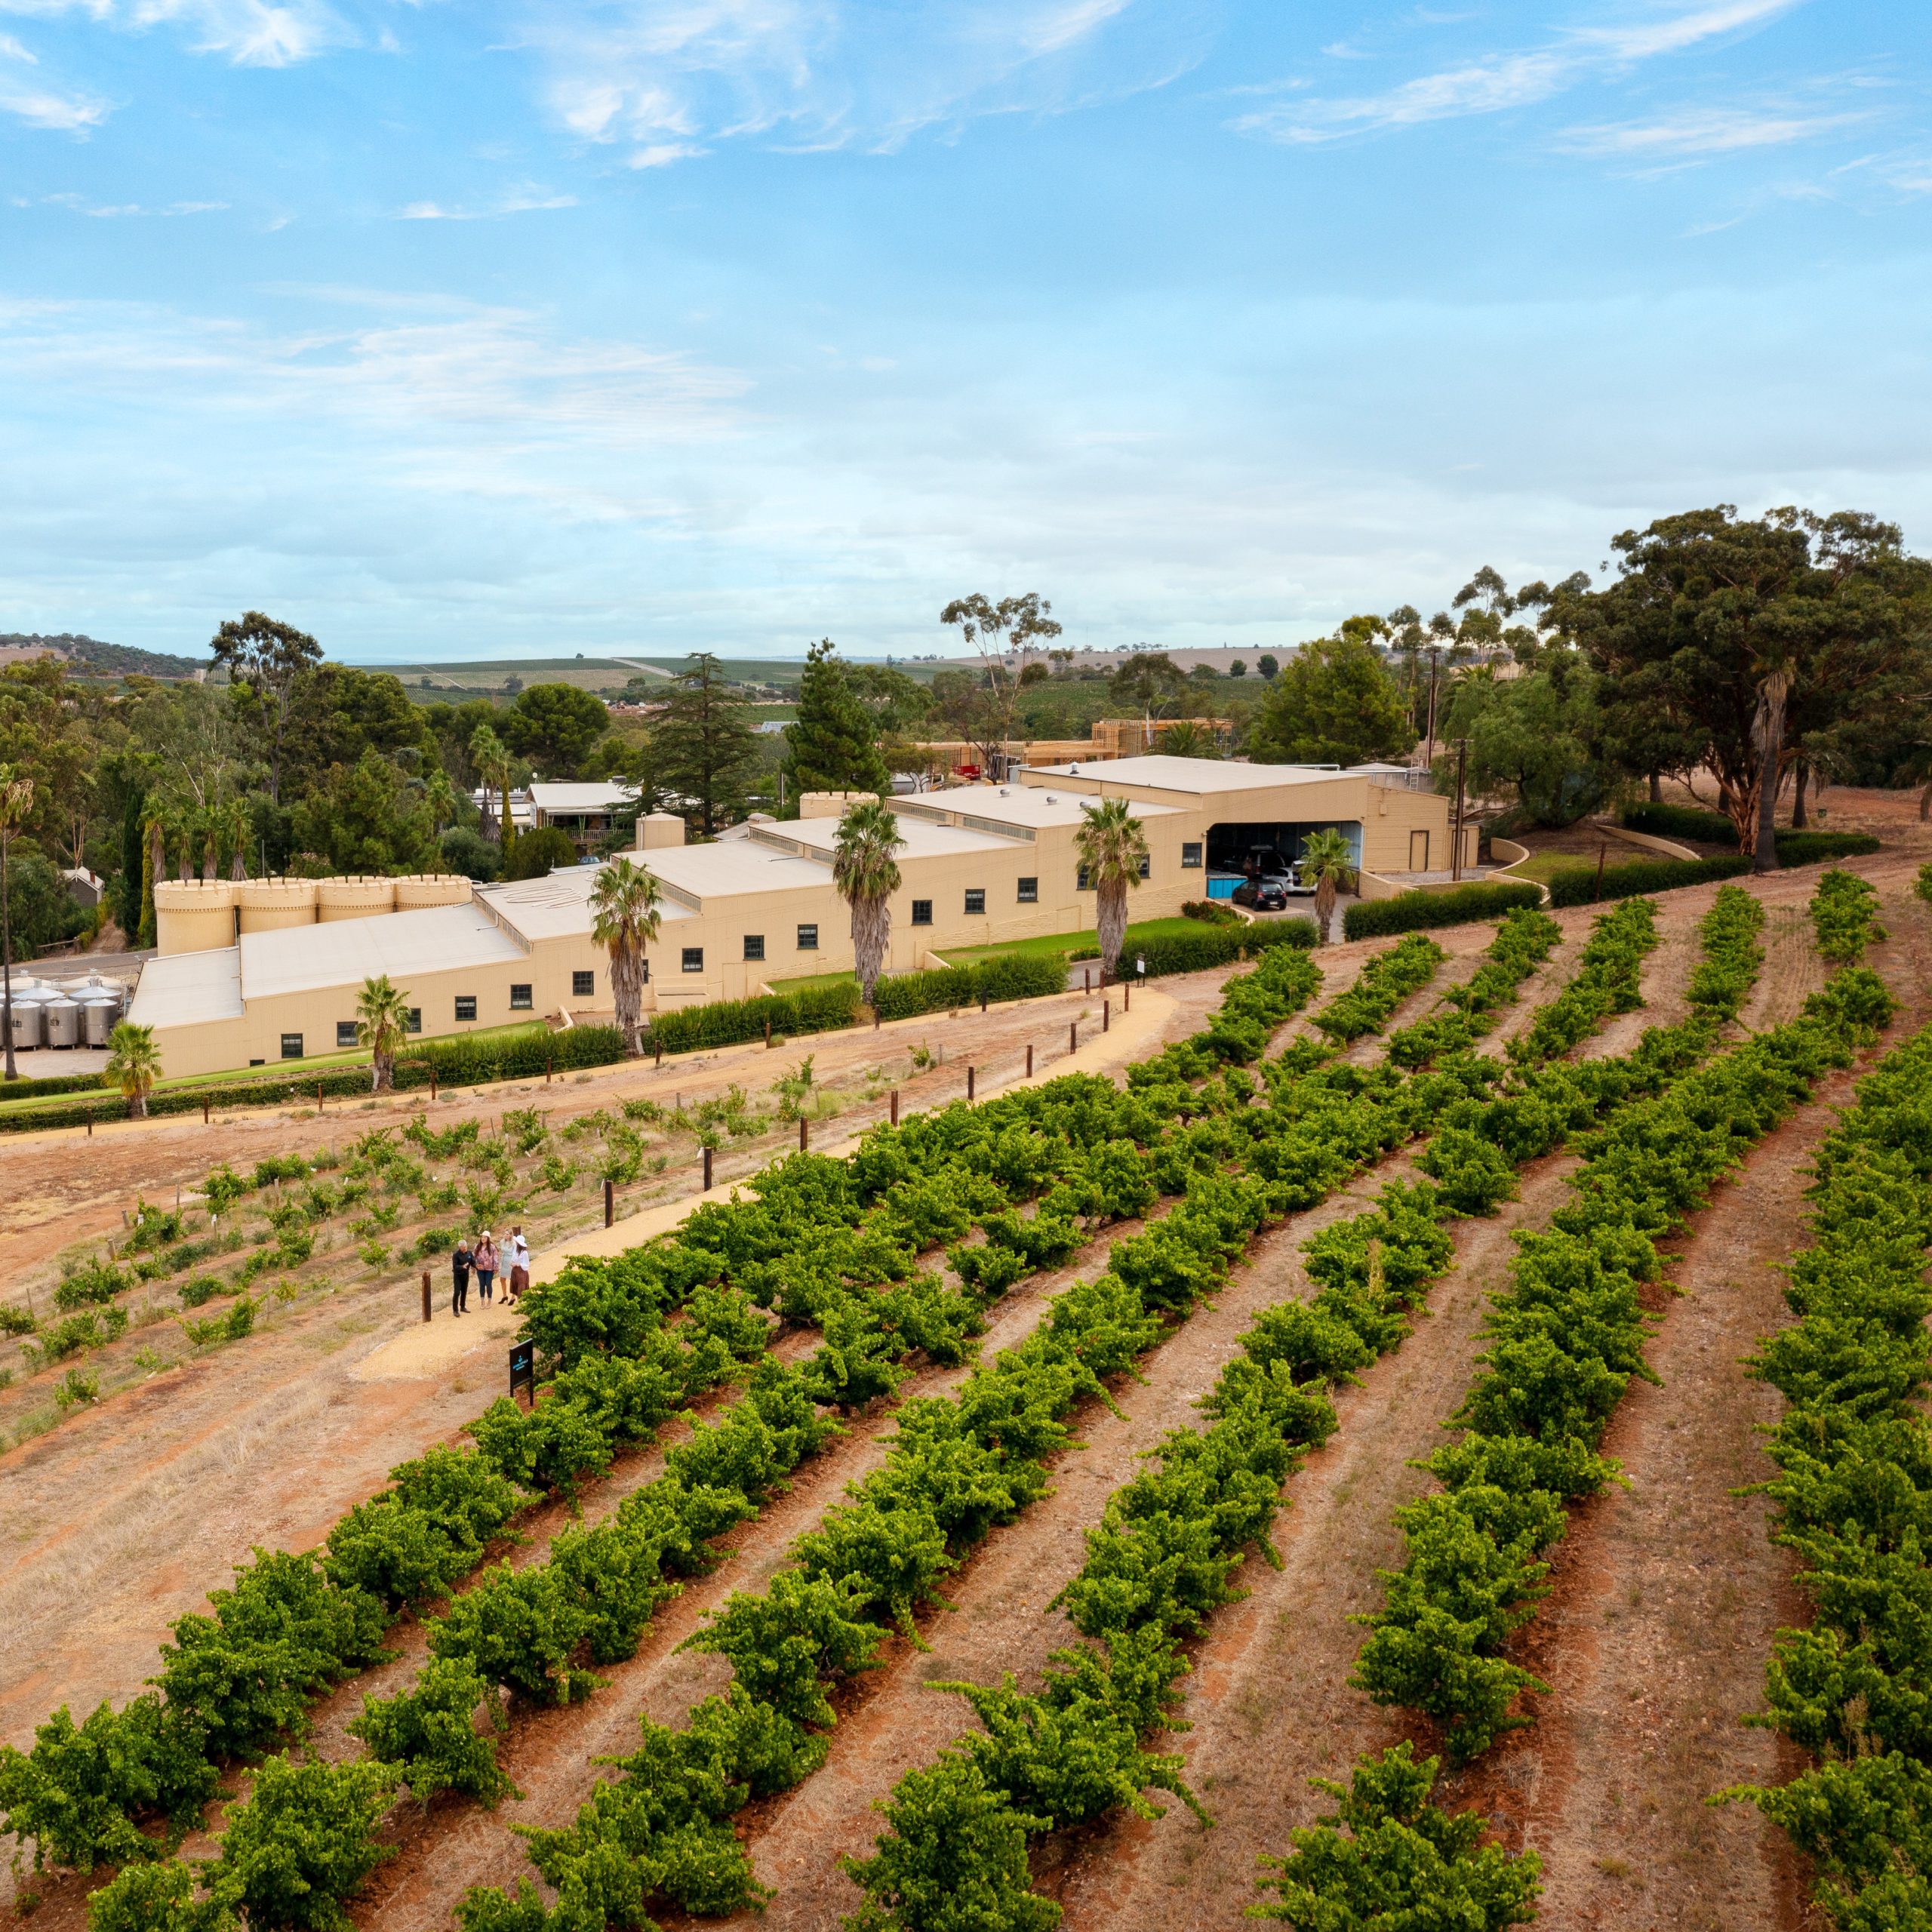 Seppeltsfield With a proud and priceless legacy dating back to 1851, Seppeltsfield is Australia's iconic wine estate. Seppeltsfield is famed for the Centennial Collection - an irreplaceable and unbroken lineage of Tawny of every vintage from 1878 to current year.